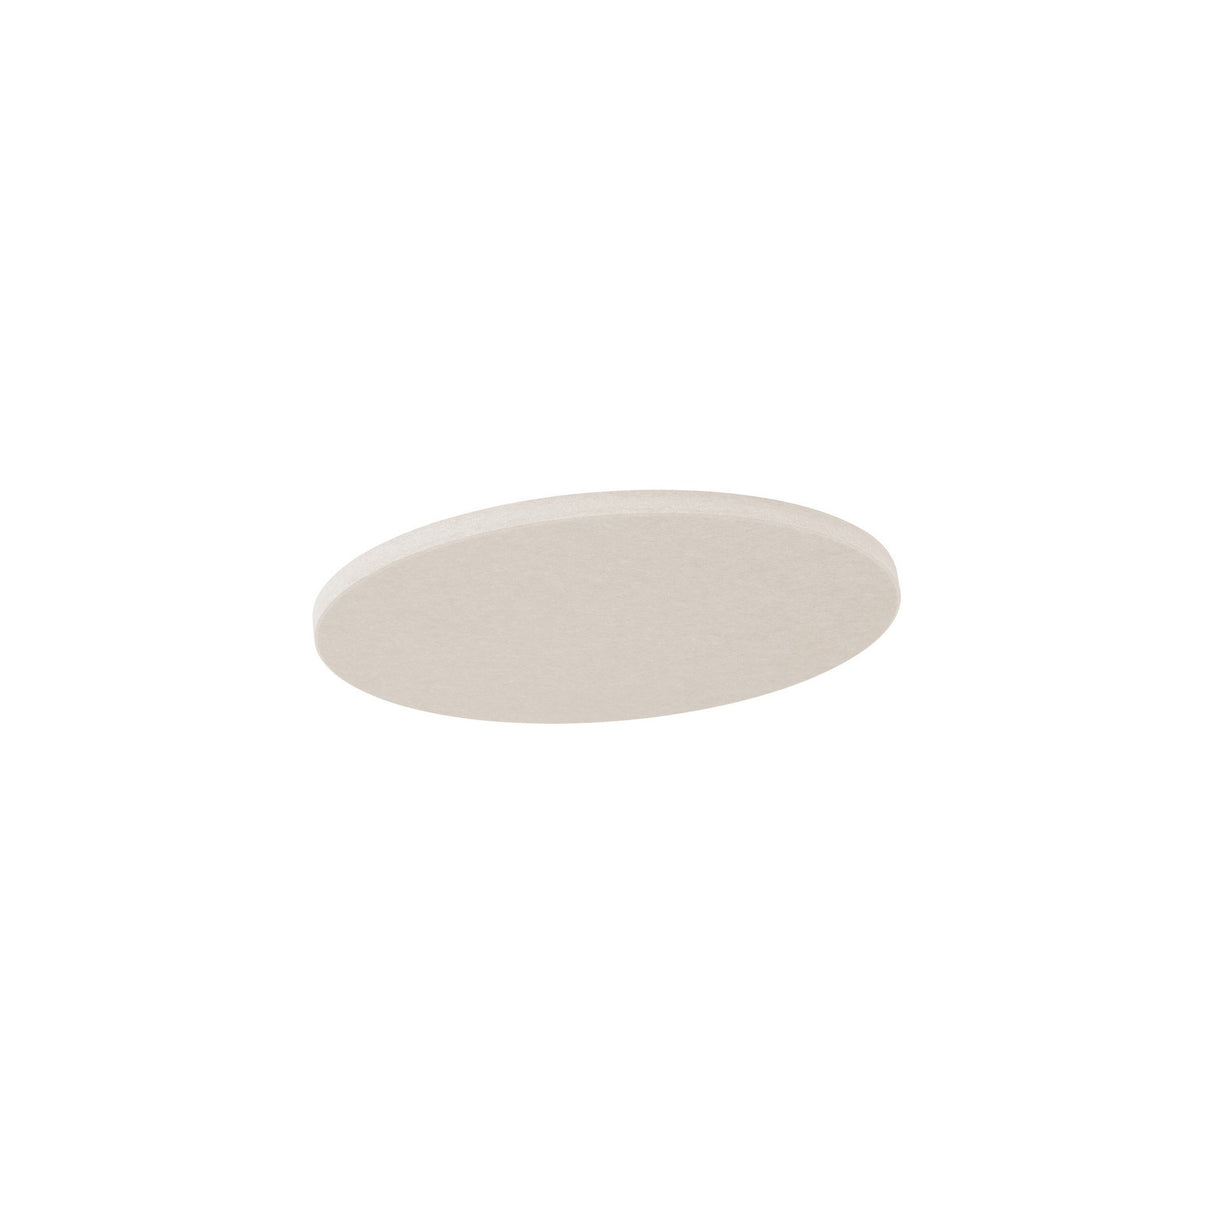 Primacoustic EcoScapes Round Cloud 18-Inch Micro-Beveled Edge Wall Panel, Ivory 4-Pack